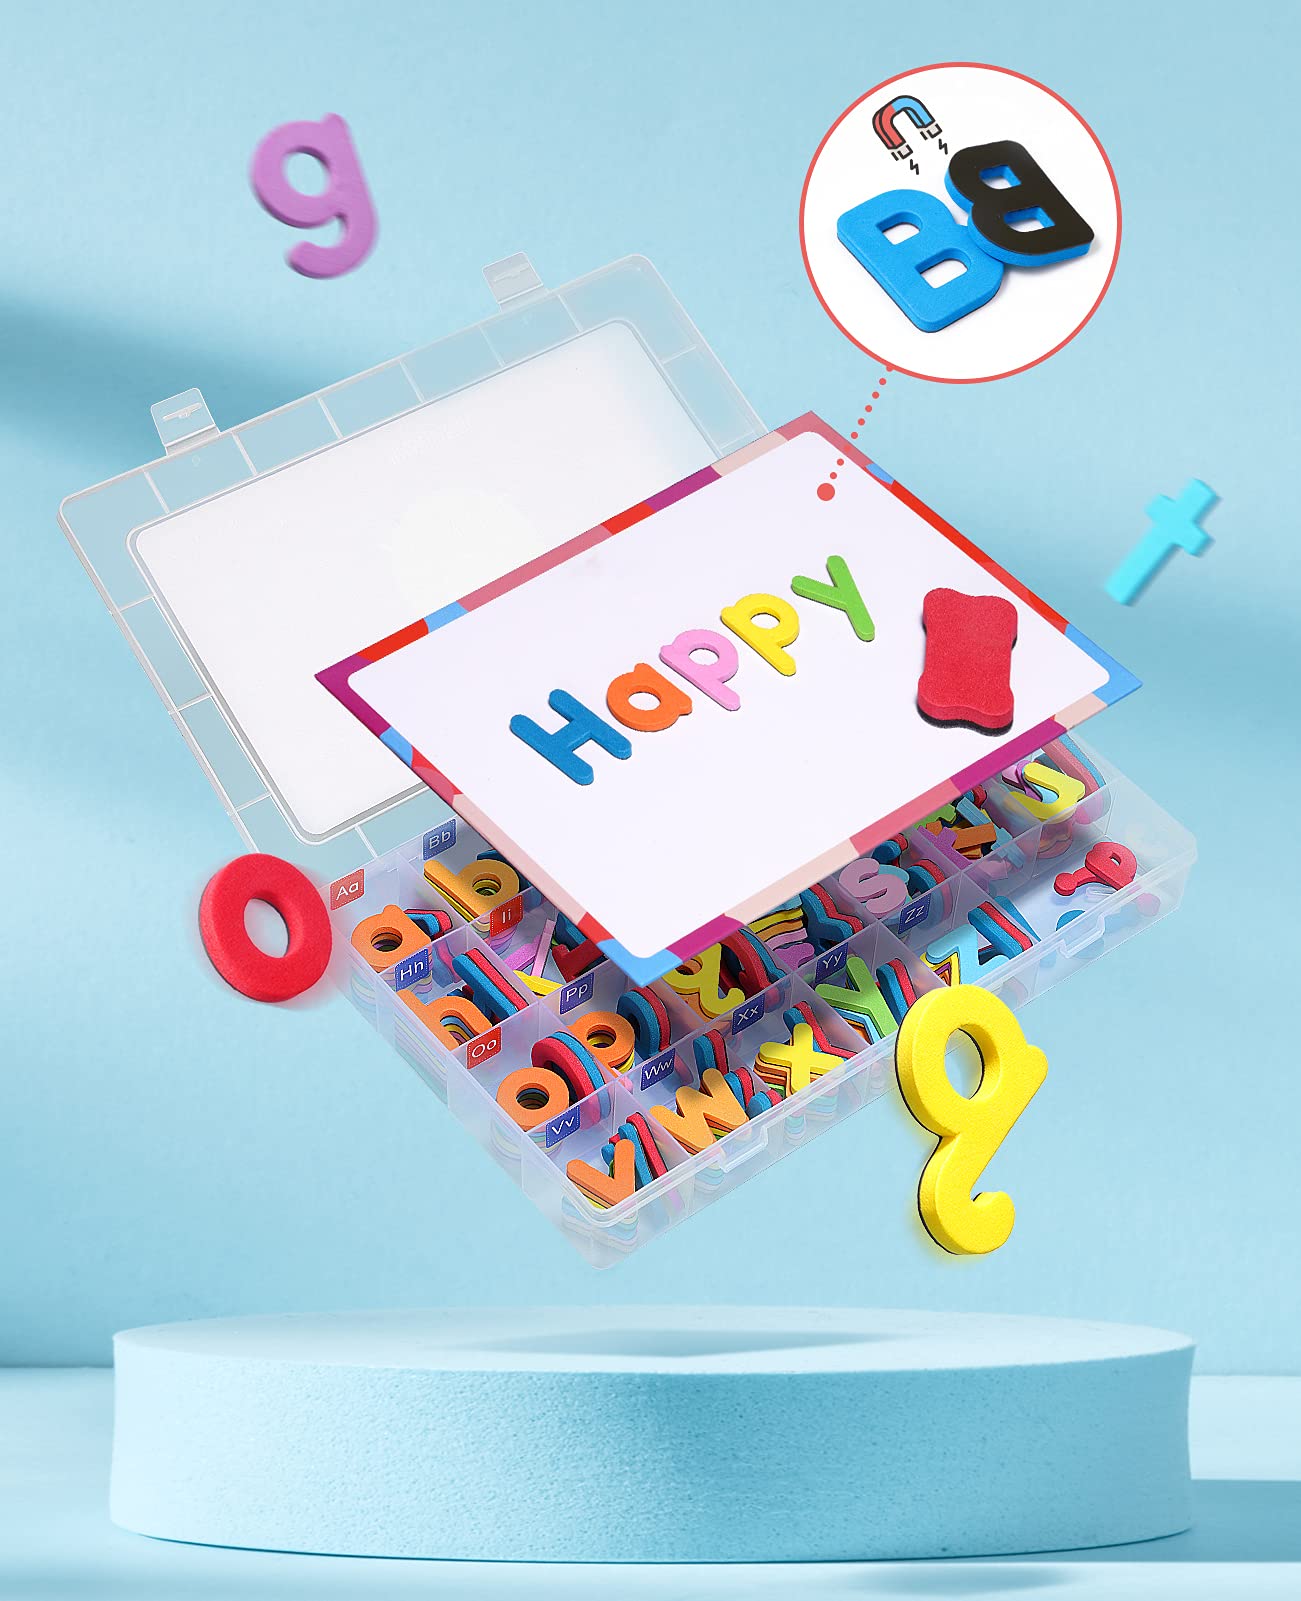 Gamenote Classroom Magnetic Alphabet Letters Kit 234 Pcs with Double - Side Magnet Board - Foam Alphabet Letters for Preschool Kids Toddler Spelling and Learning Colorful